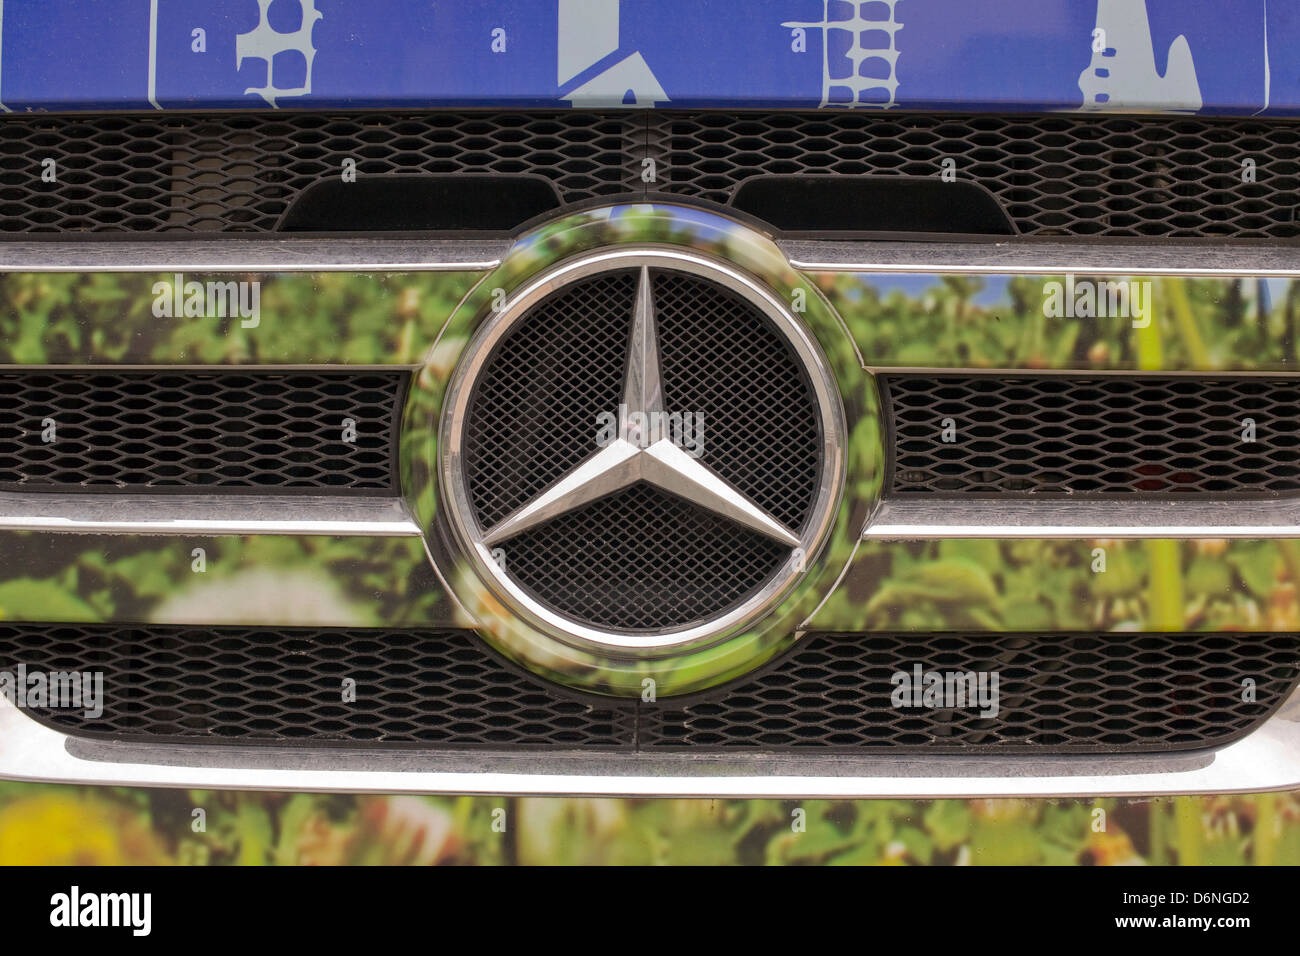 Grille of a Customized Mercedes Benz Truck Stock Photo